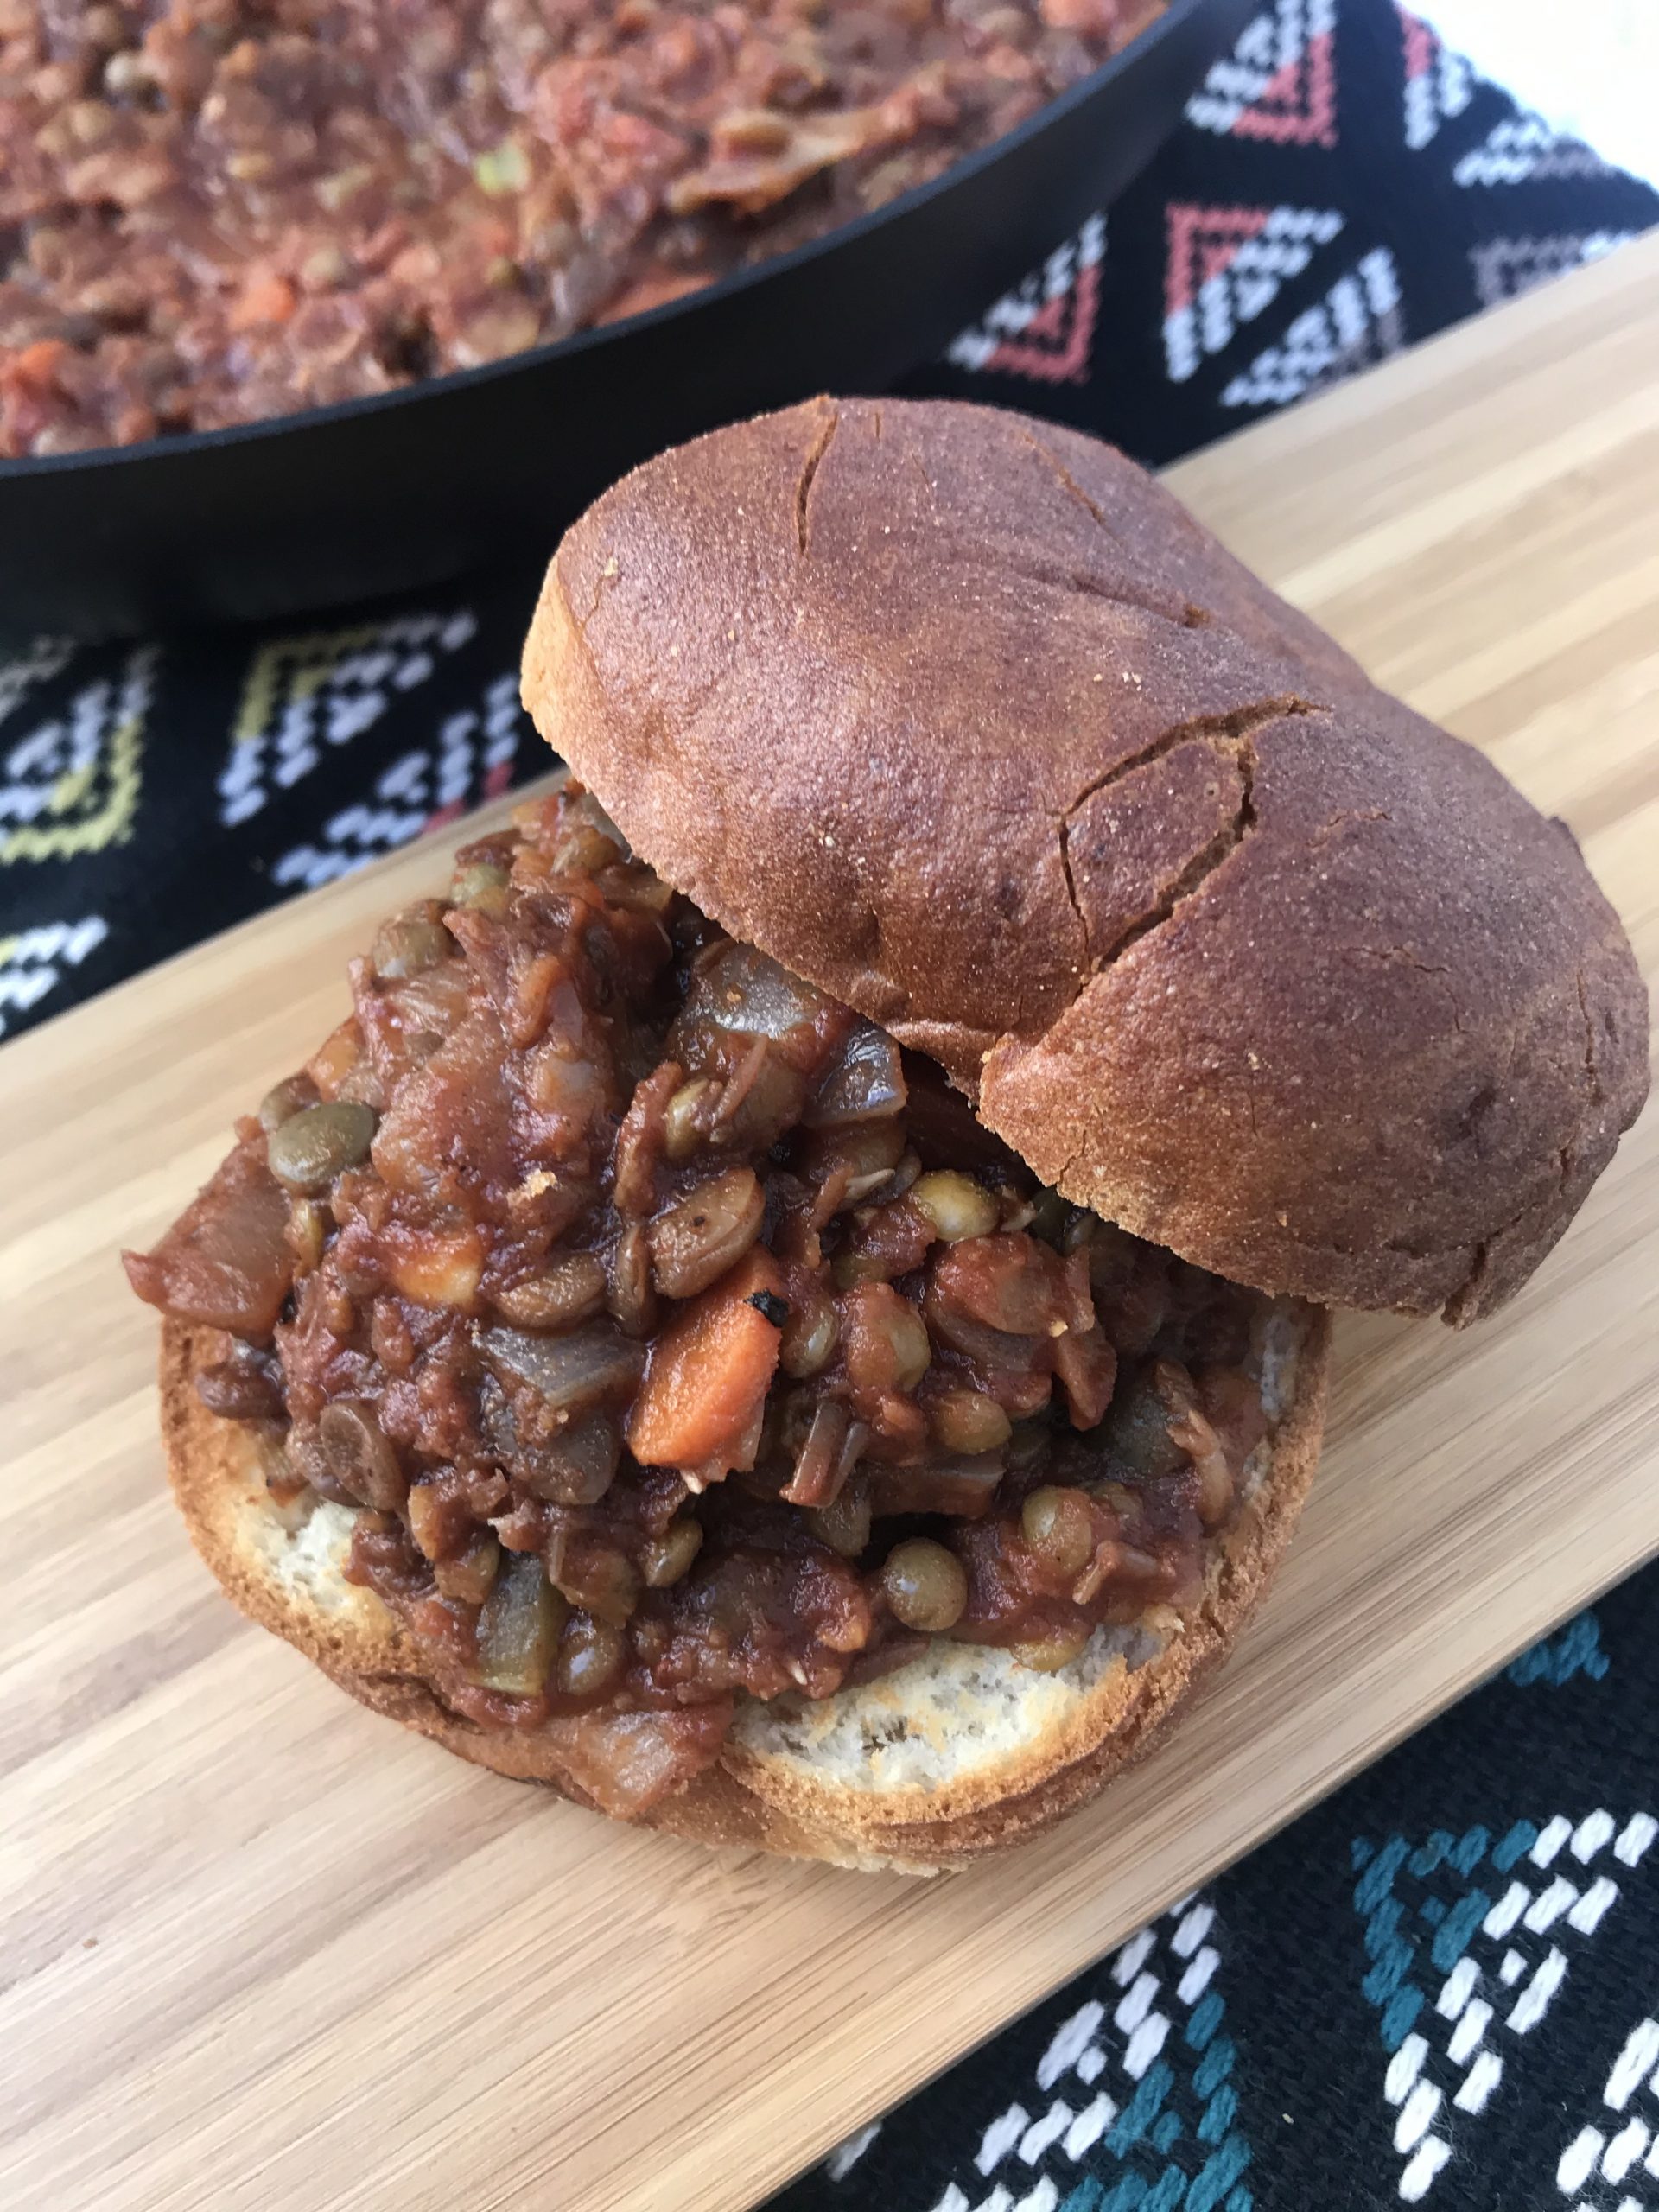 sloppy joe lentils on a bun with more lentils in the background